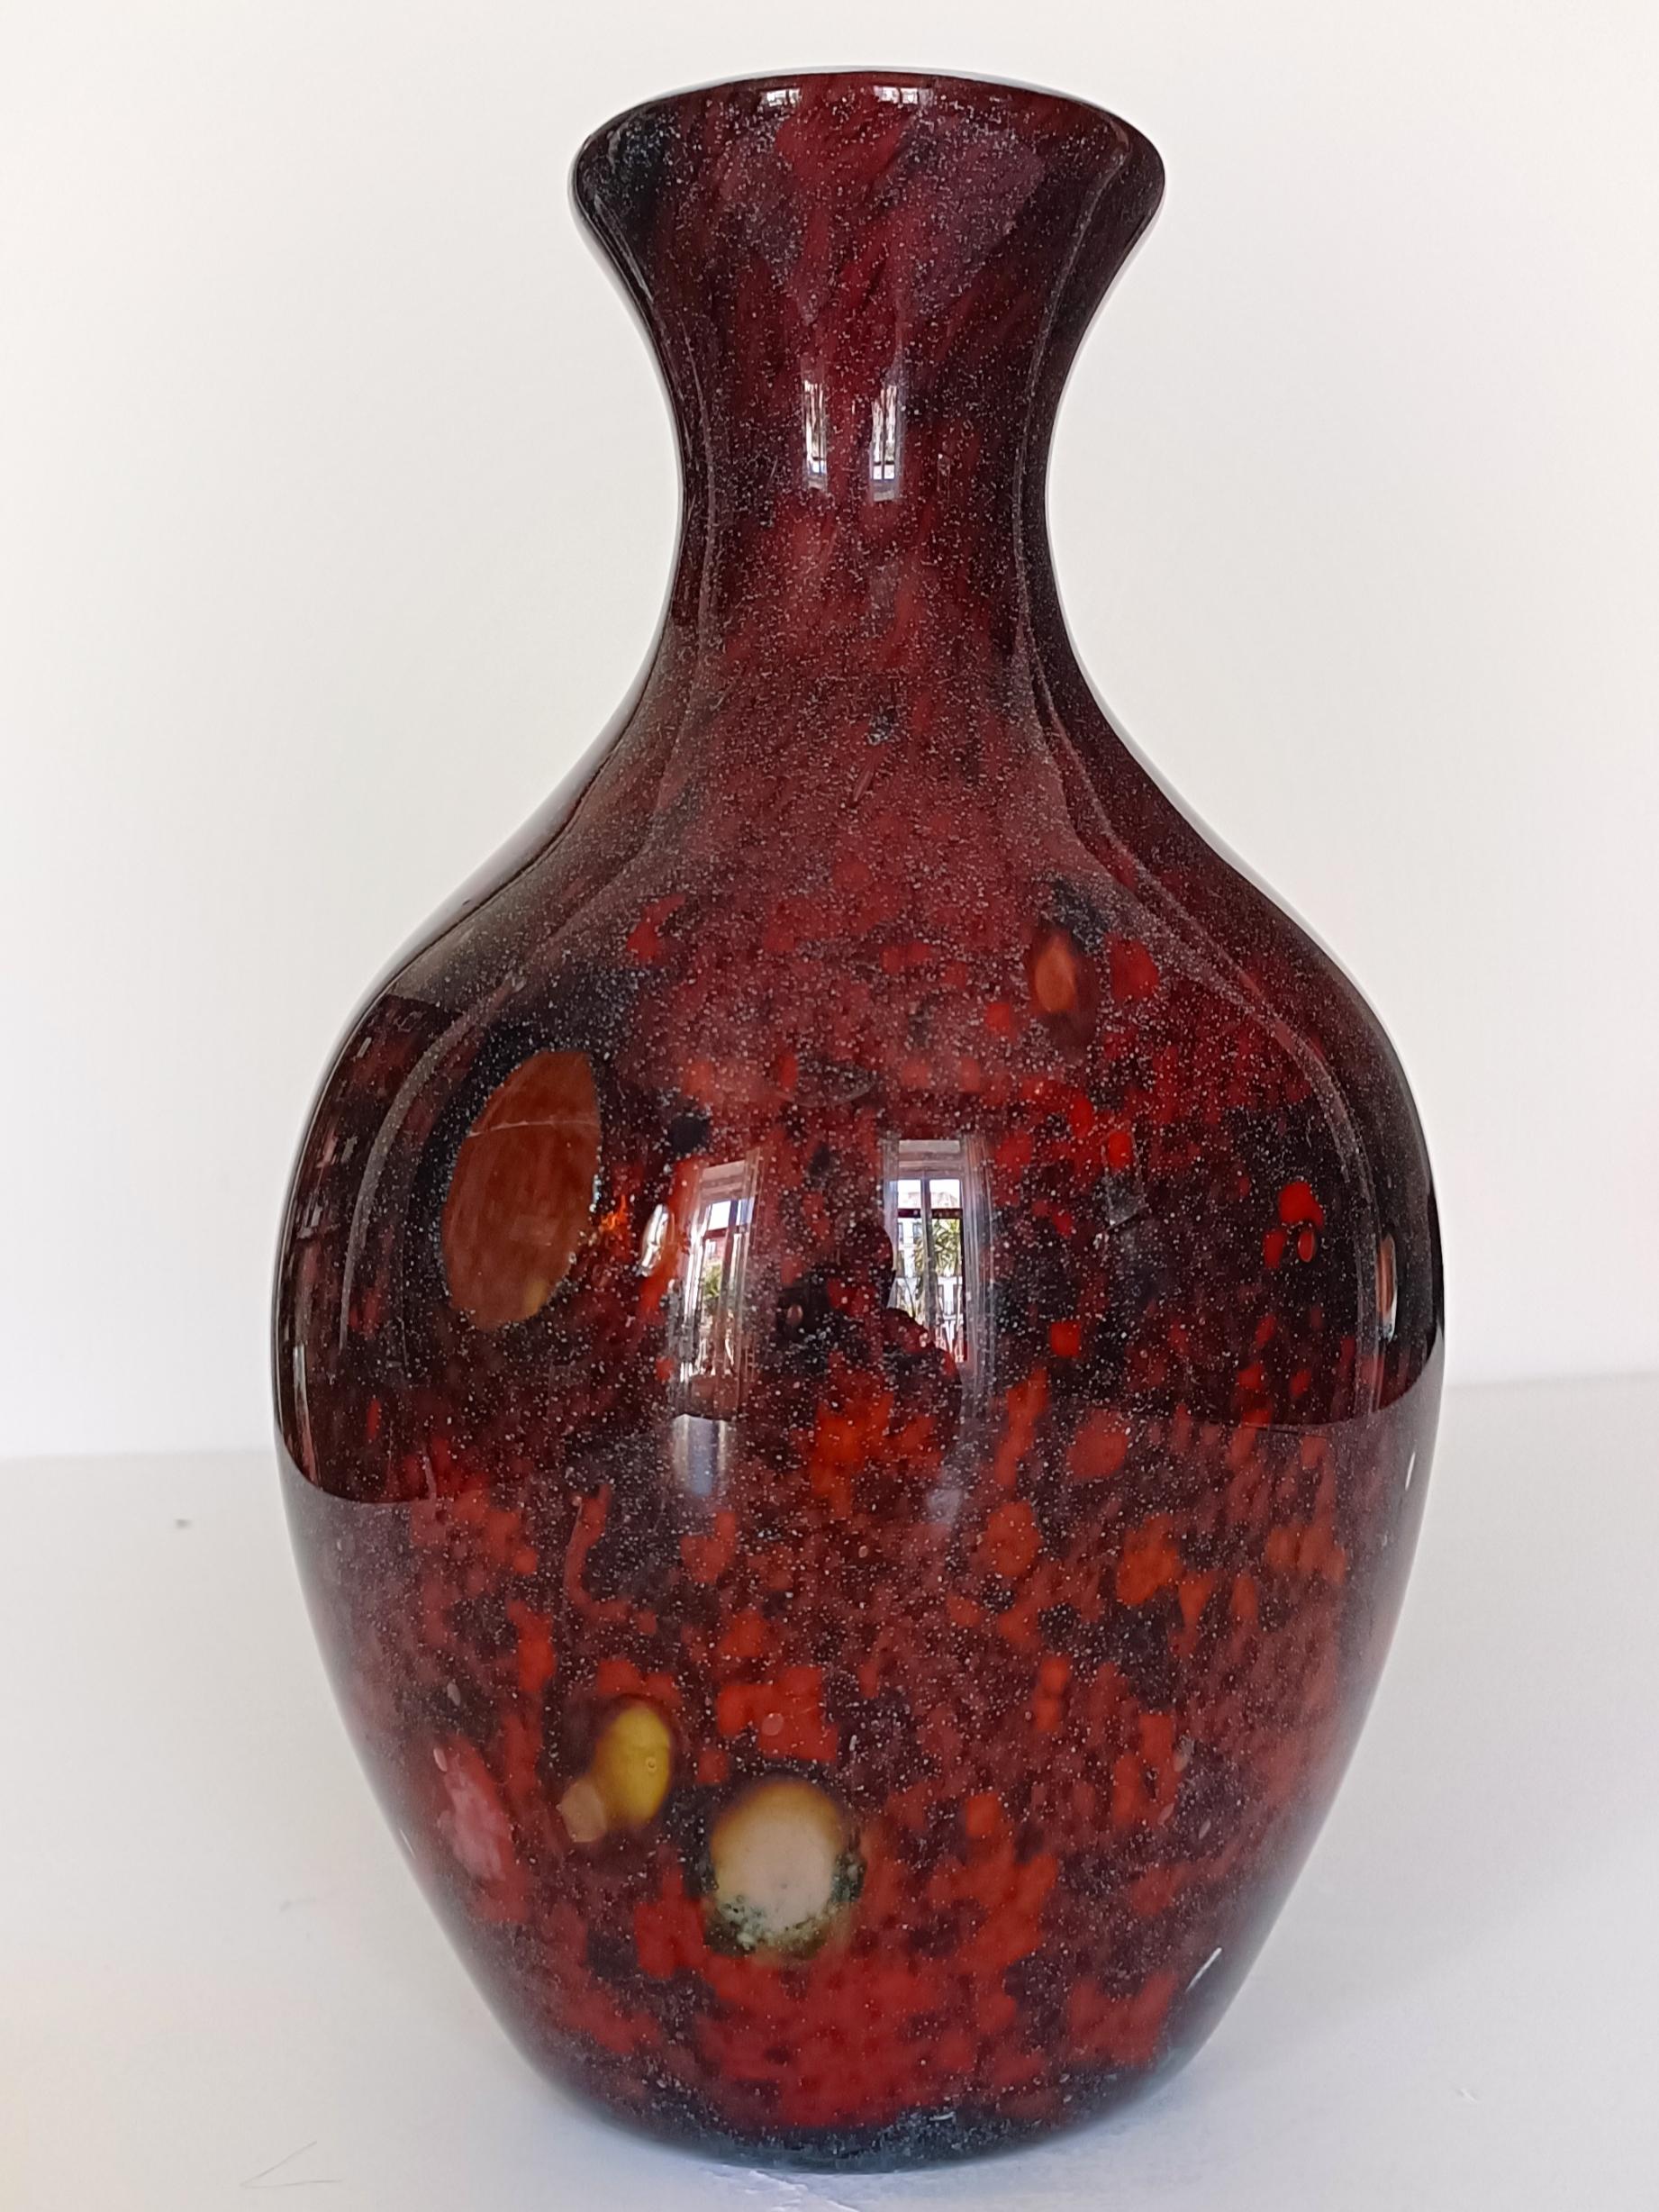 Step into the timeless elegance of Mid-Century Modern Murano glass with this exquisite hand-blown vase, a gorgeous piece that blends artistry and craftsmanship. 

This outstandingly beautiful piece features an intricate pattern of red and burgundy